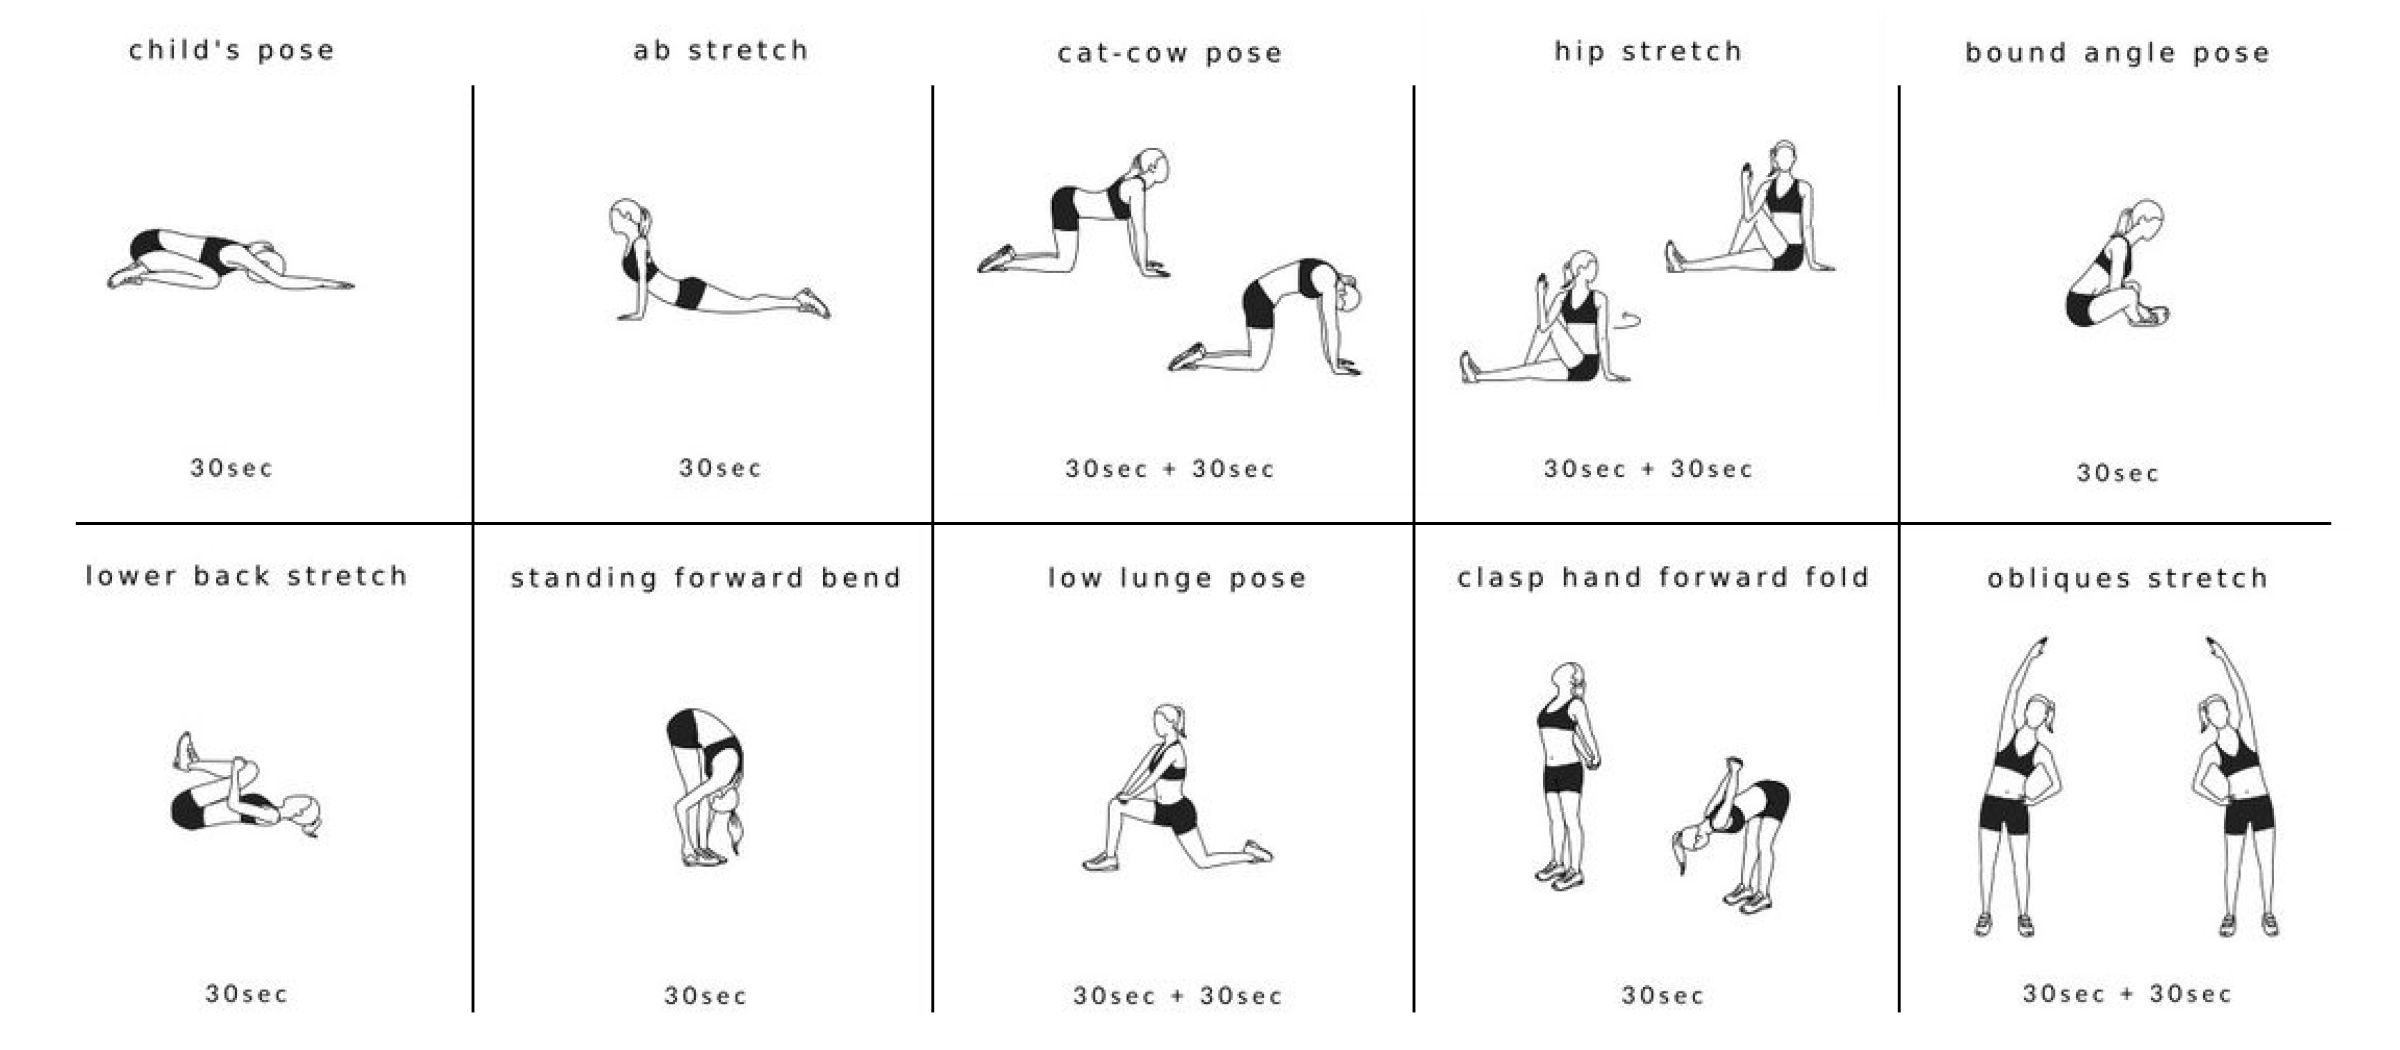 STRETCHING 2021: Modern Stretching for Beginners at Home